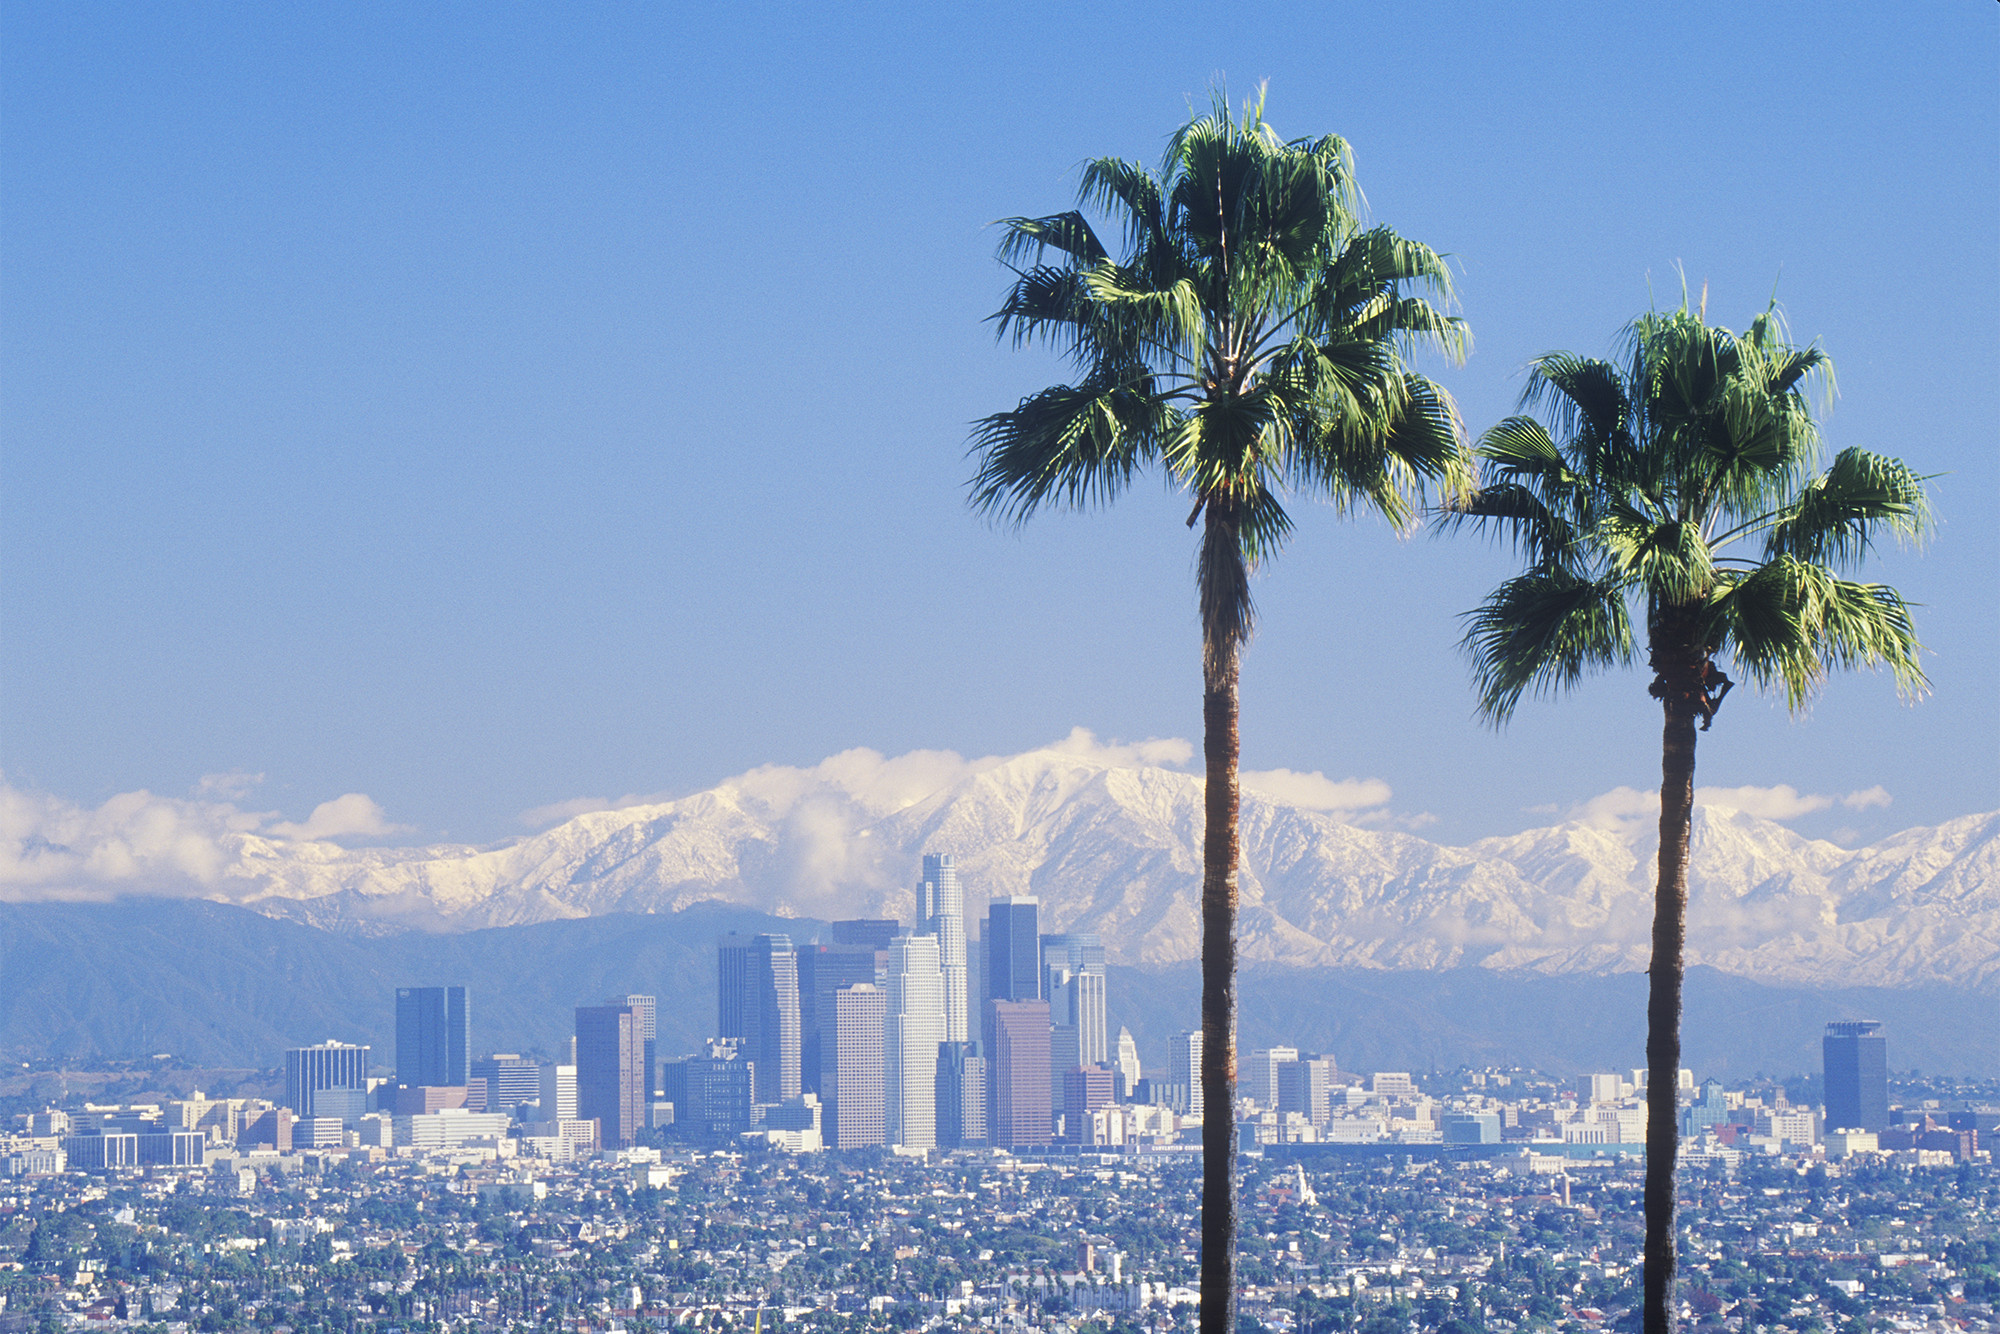 LA's palm trees are dying and they won't be replaced